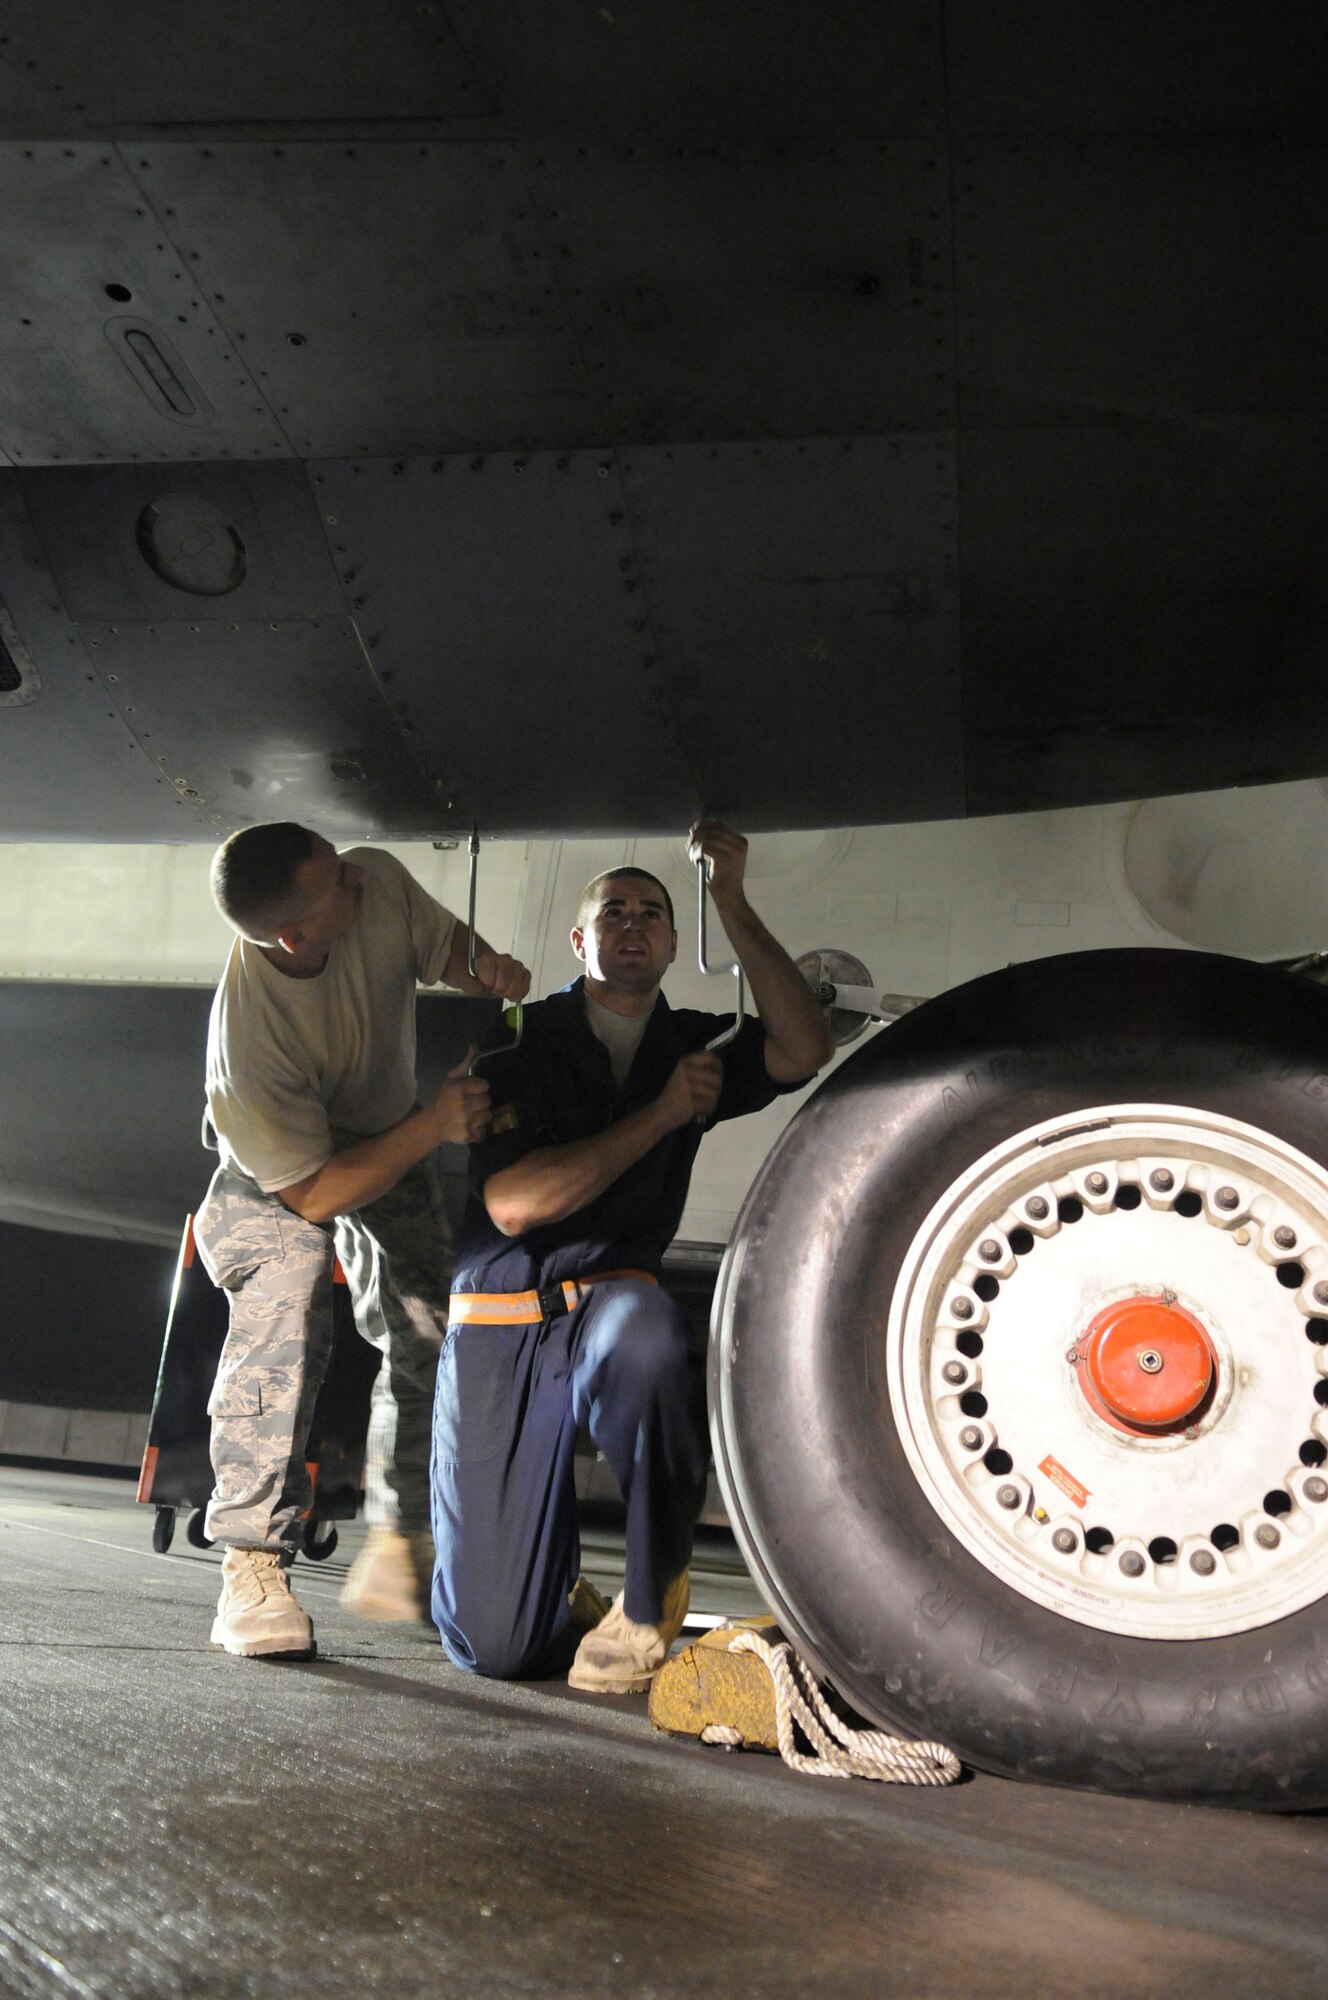 Staff Sgt. Vince Billyk and Senior Airman Reilly White, crew chiefs assigned to the 379th Expeditionary Aircraft Maintenance Squadron, tighten fasteners while replacing a gearbox panel on a B-1 Lancer, Nov. 24, at an undisclosed air base in Southwest Asia.  Carrying the largest payload of both guided and unguided weapons in the Air Force inventory, the multi-mission B-1 is the backbone of America's long-range bomber force. It can rapidly deliver massive quantities of precision and non-precision weapons against any adversary, anywhere in the Central Command area of responsibility.  Sergeant Billyk, a native of Philadelphia, Pa., and Airman White, from Laporte, Pa., are both deployed from Ellsworth Air Force Base, S.D., in support of Operations Iraqi and Enduring Freedom and Joint Task Force-Horn of Africa.  (U.S. Air Force photo by Tech. Sgt. Michael Boquette/Released)